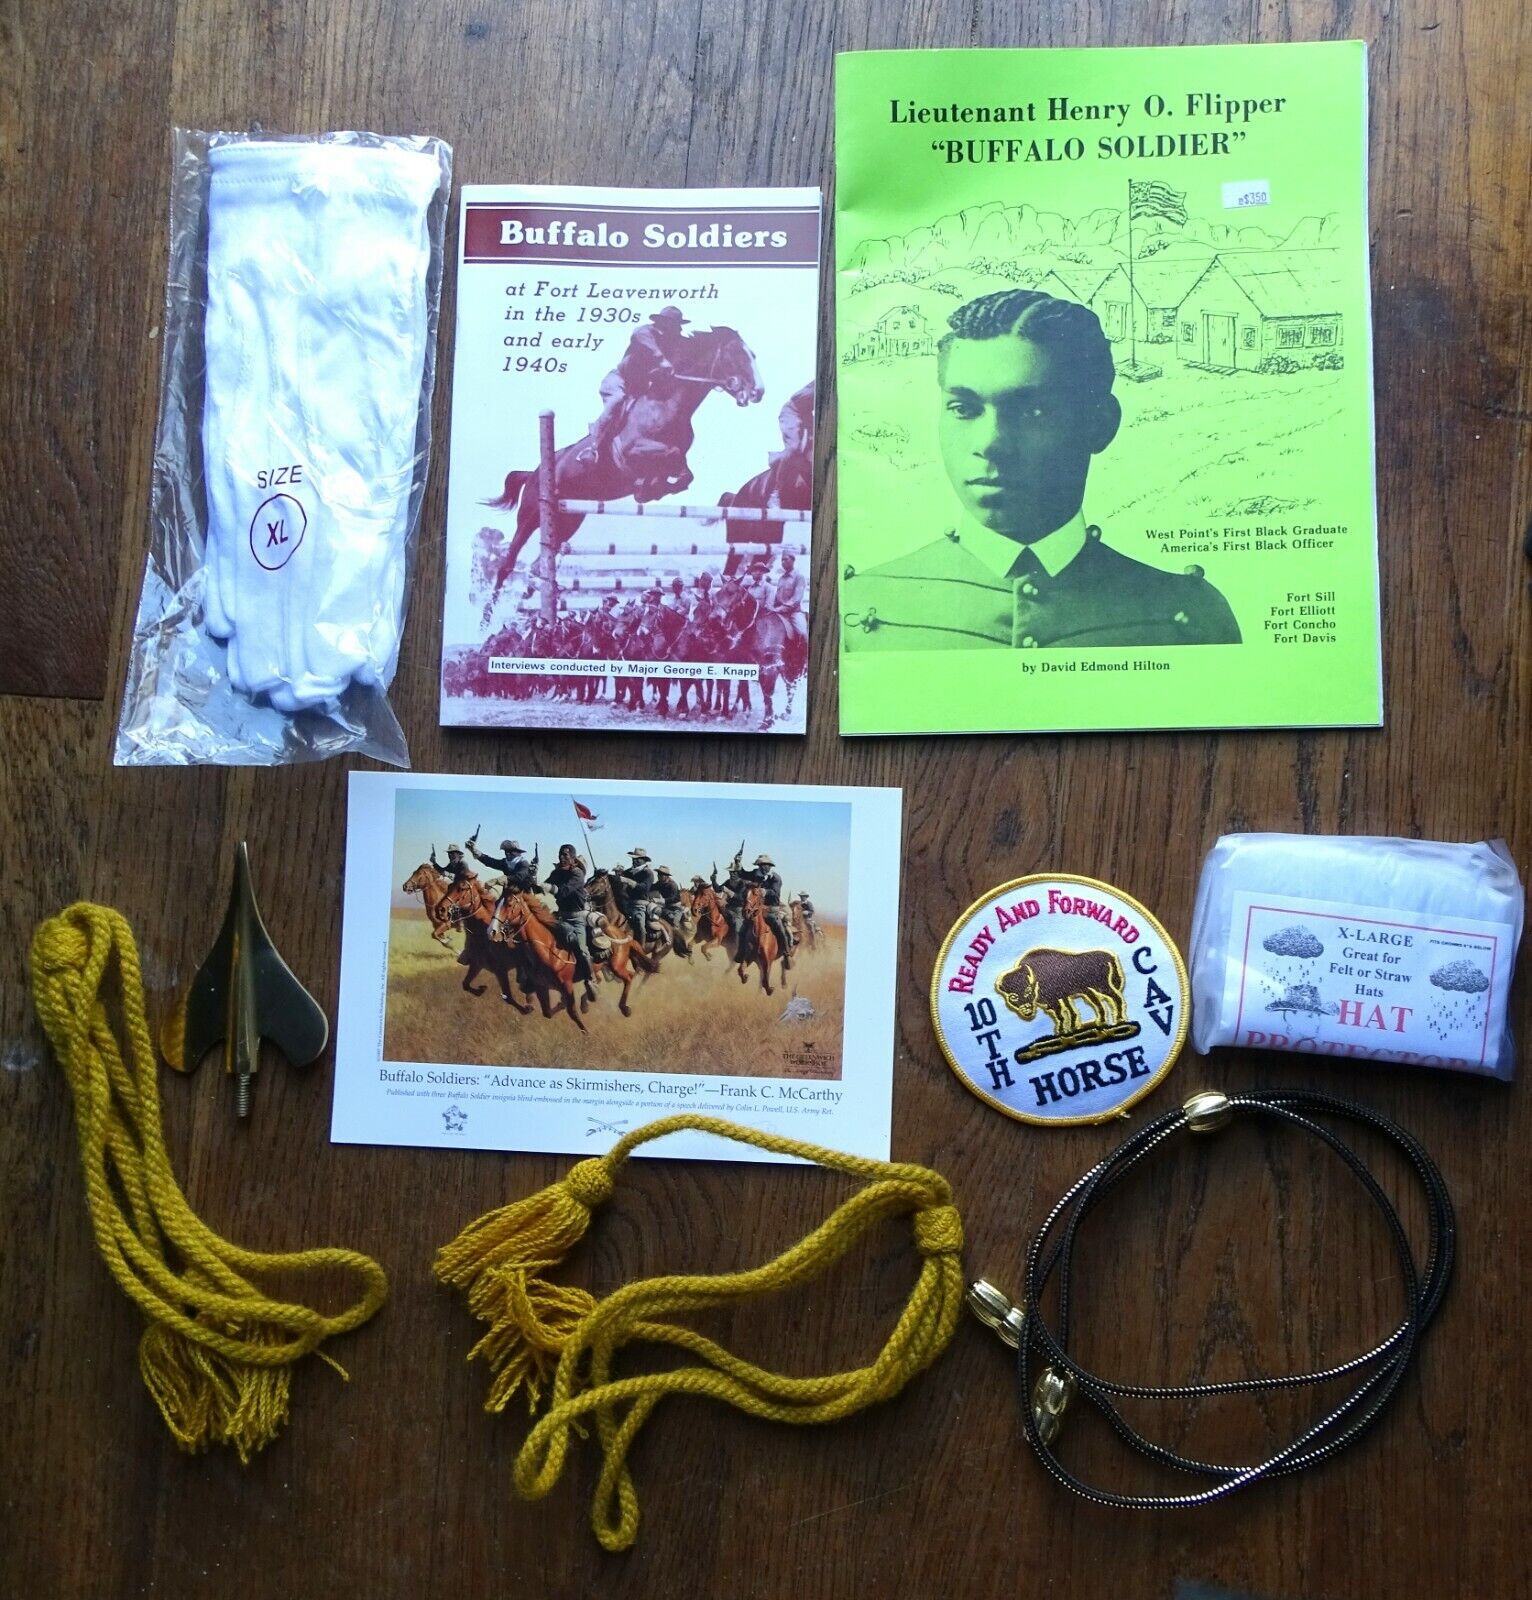 Buffalo Soldiers Patch & Books + Tassels, Tie ? & More (from reenactment guy) 